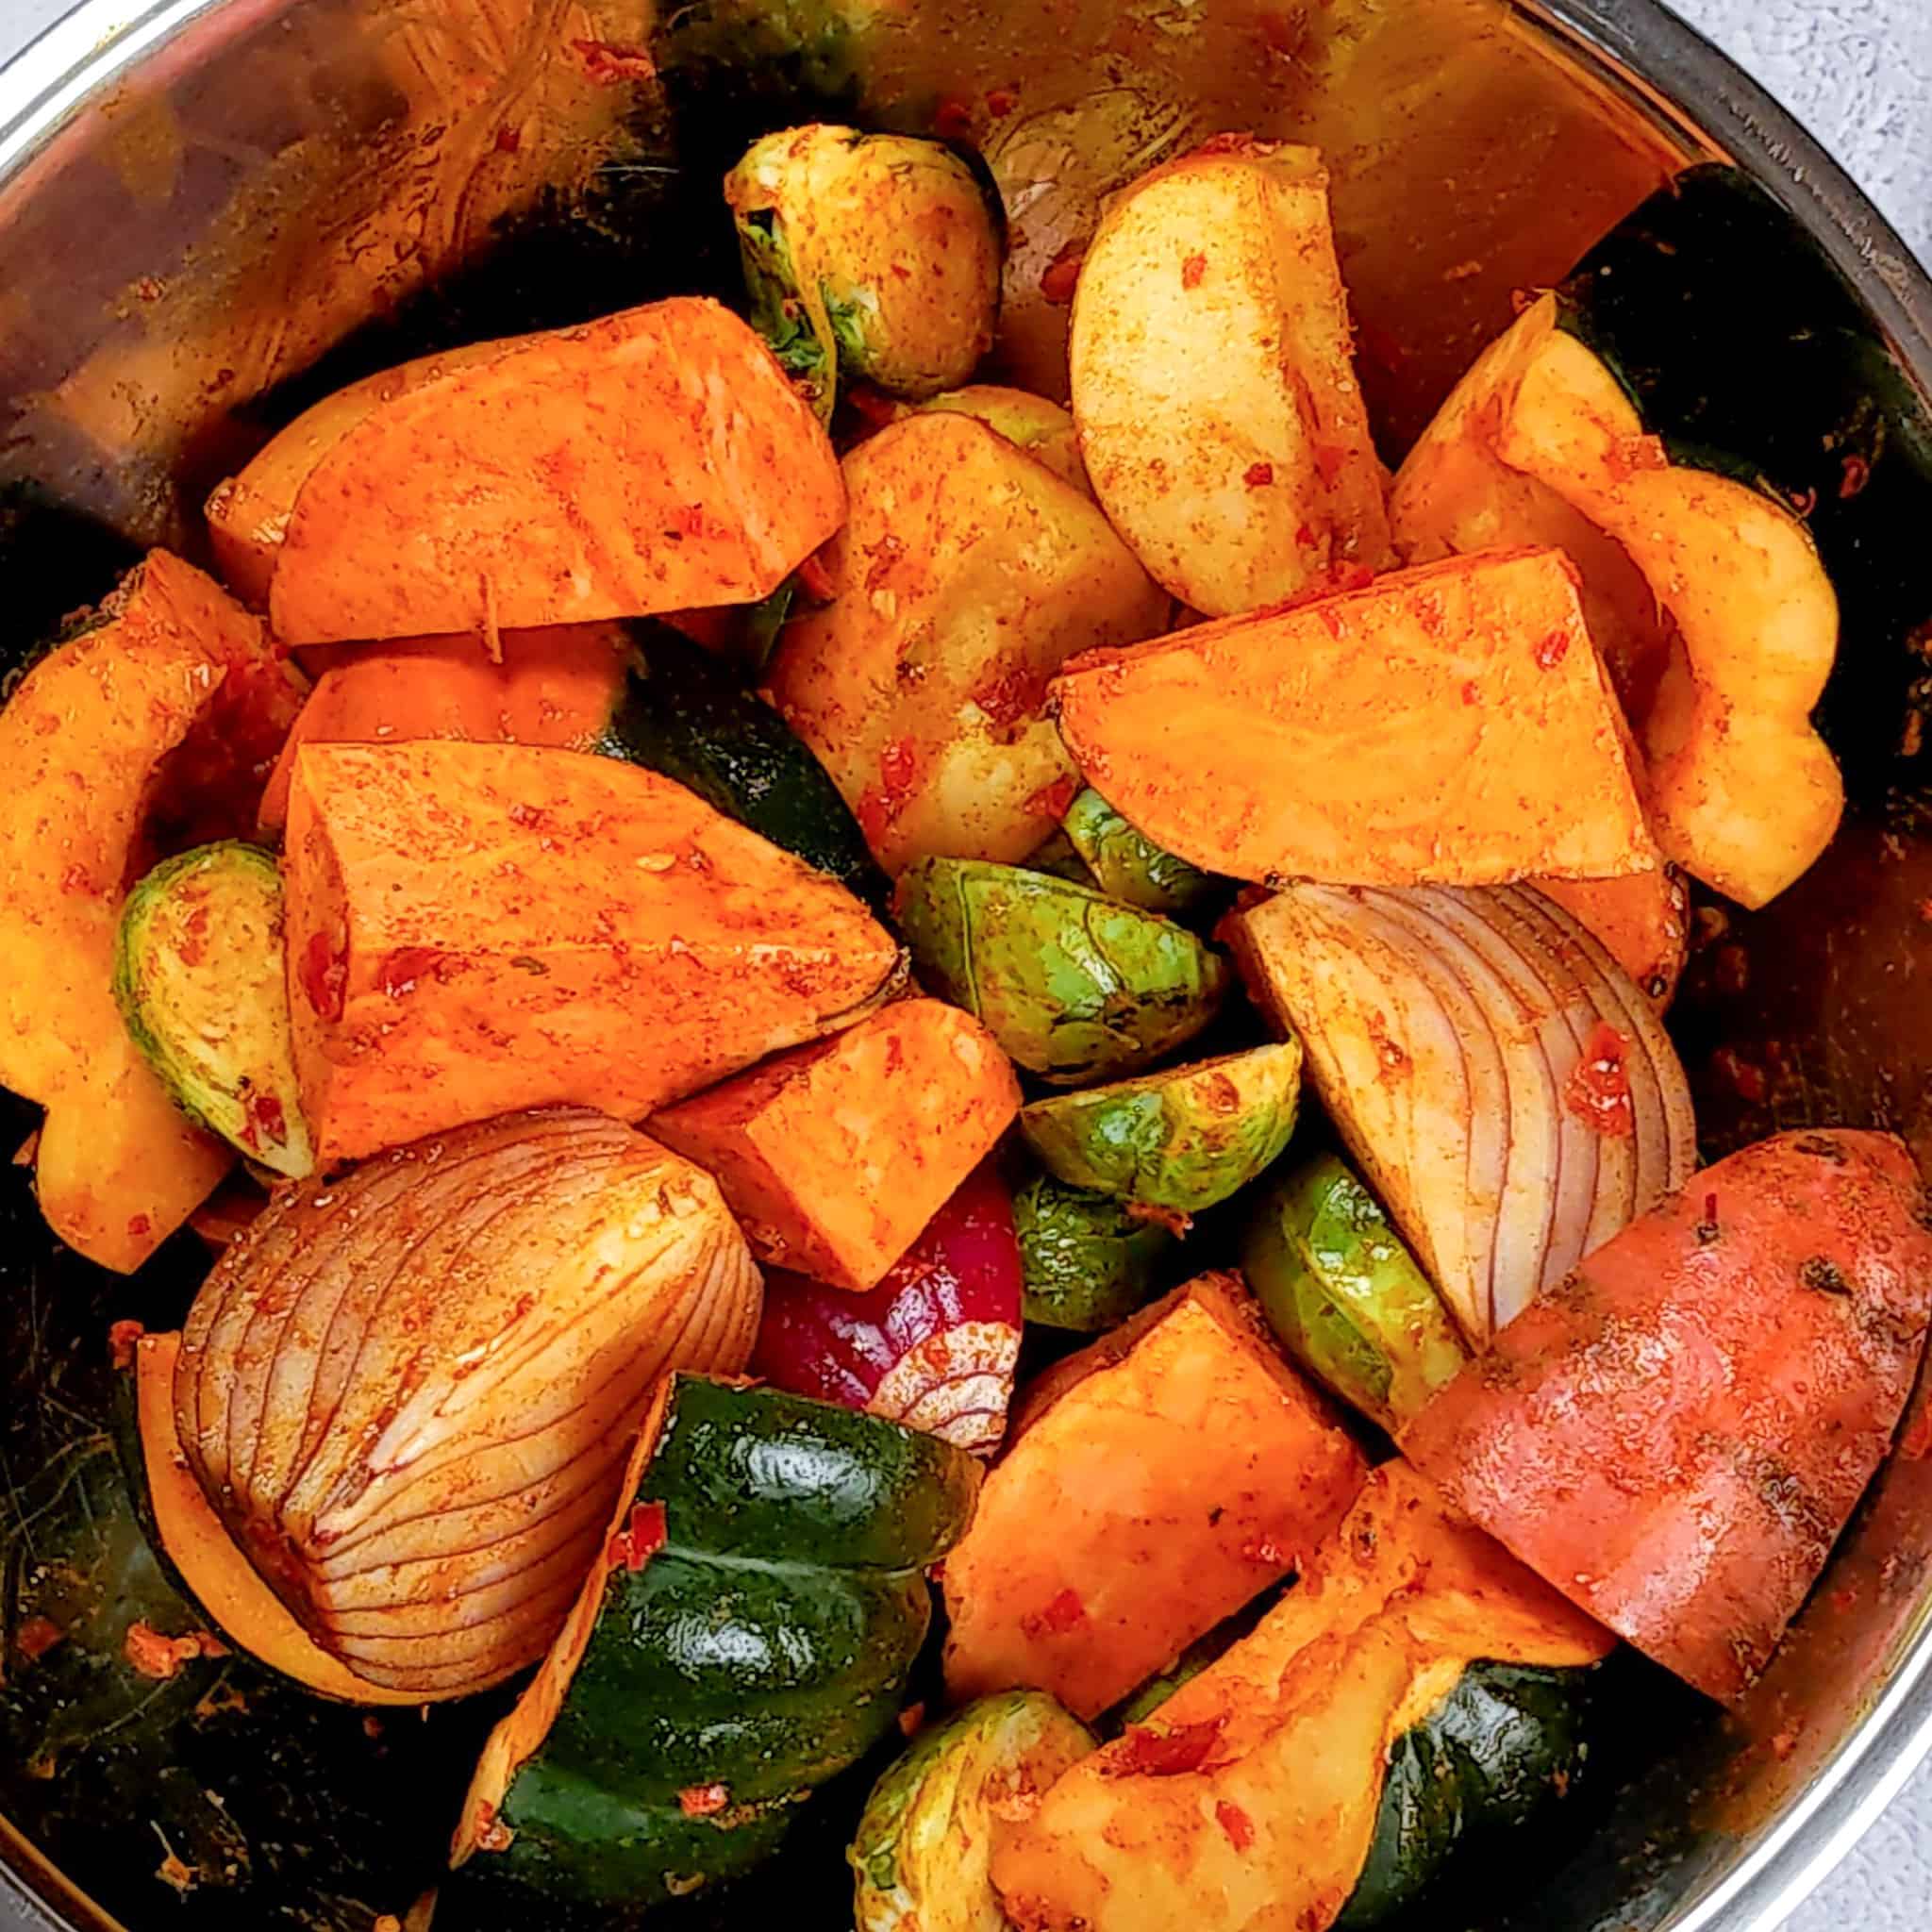 acorn squash, sweet potatoes, red onions, brussel sprouts, and apples cut into large chunks and tossed in seasoning in a large metal mixing bowl